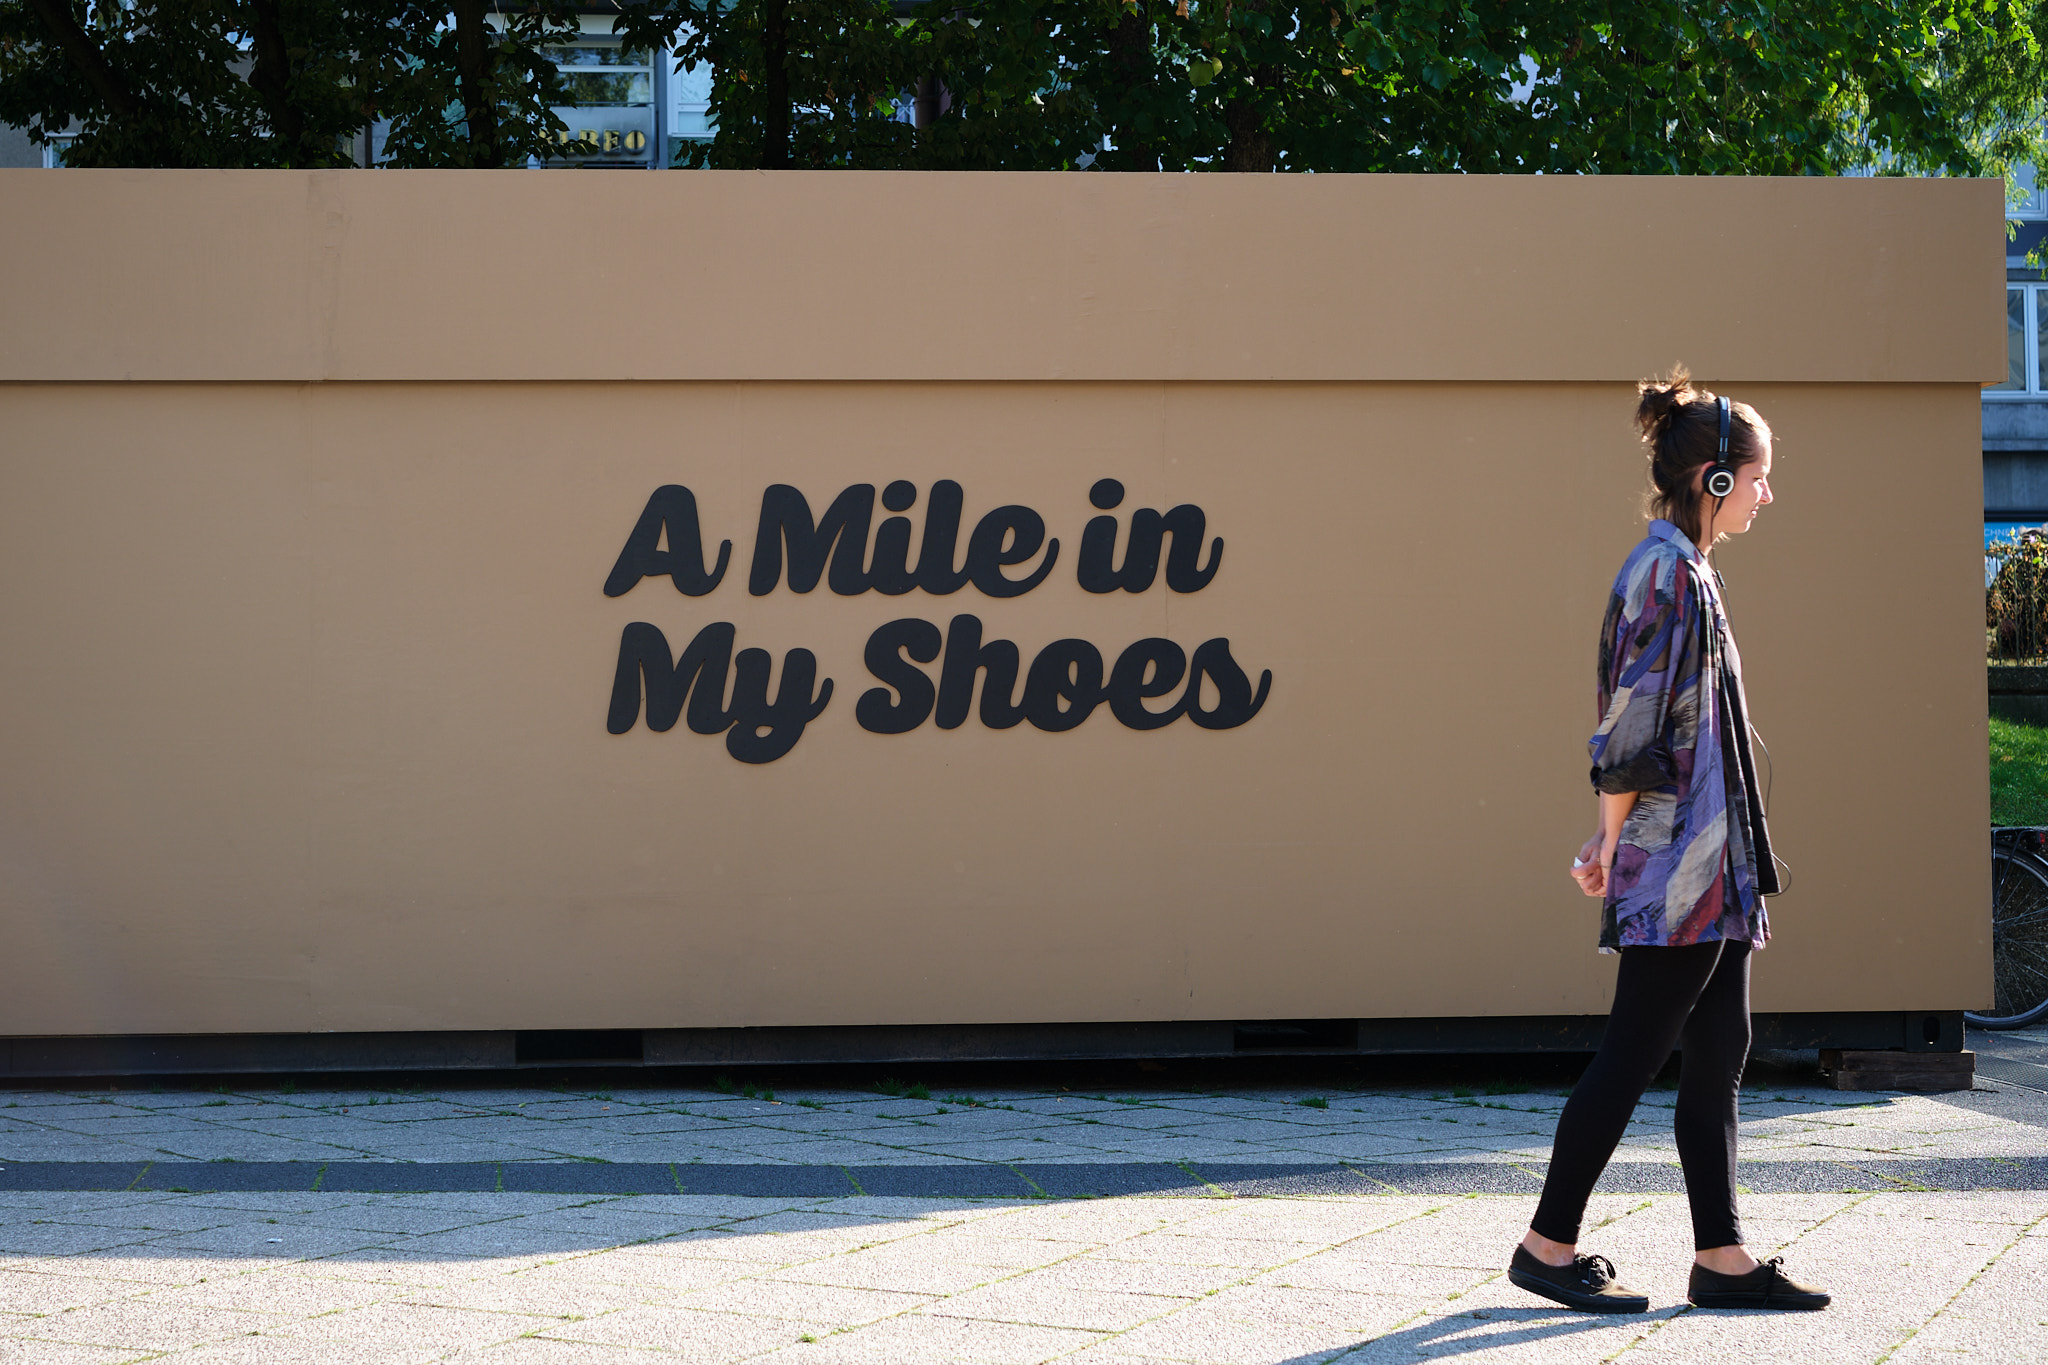 Empathy Museum “ A Mile in My Shoes“